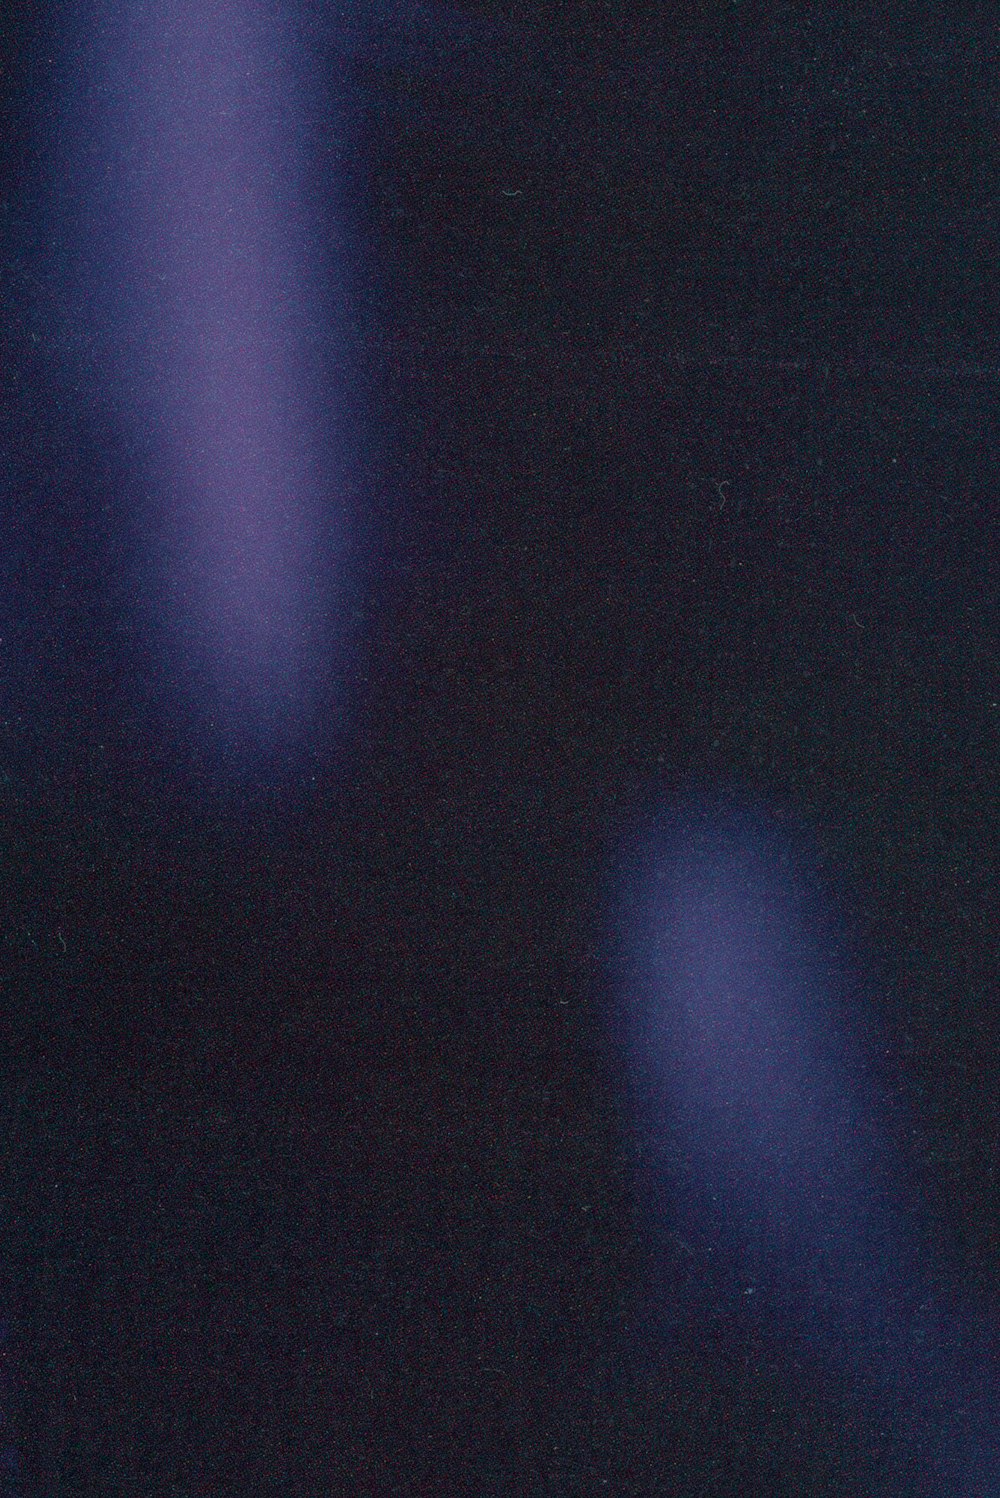 a blurry image of a blue light in the dark